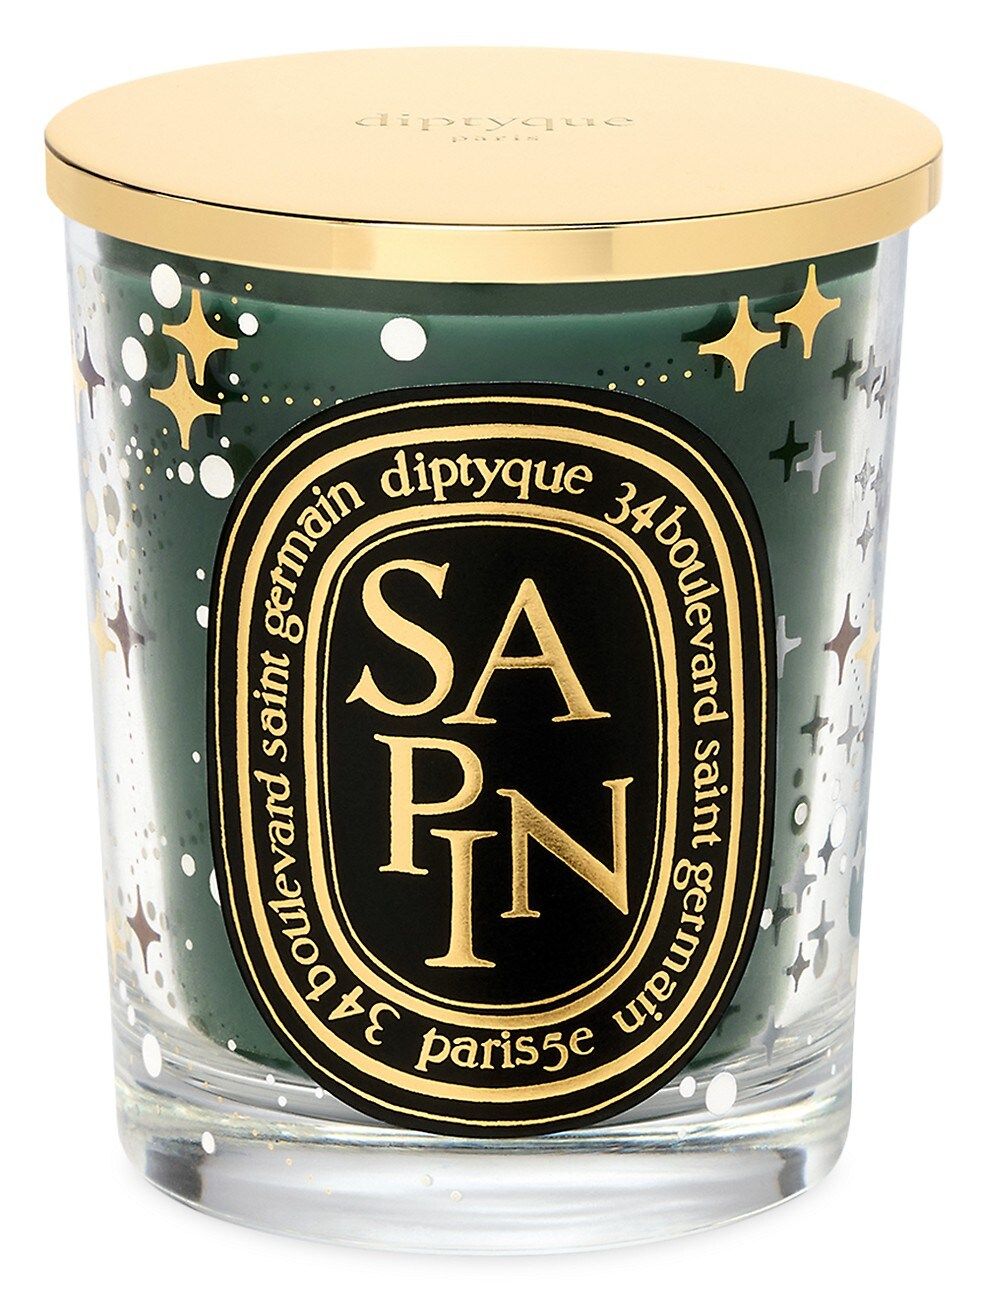 Diptyque Limited Edition Sapin Candle | Saks Fifth Avenue